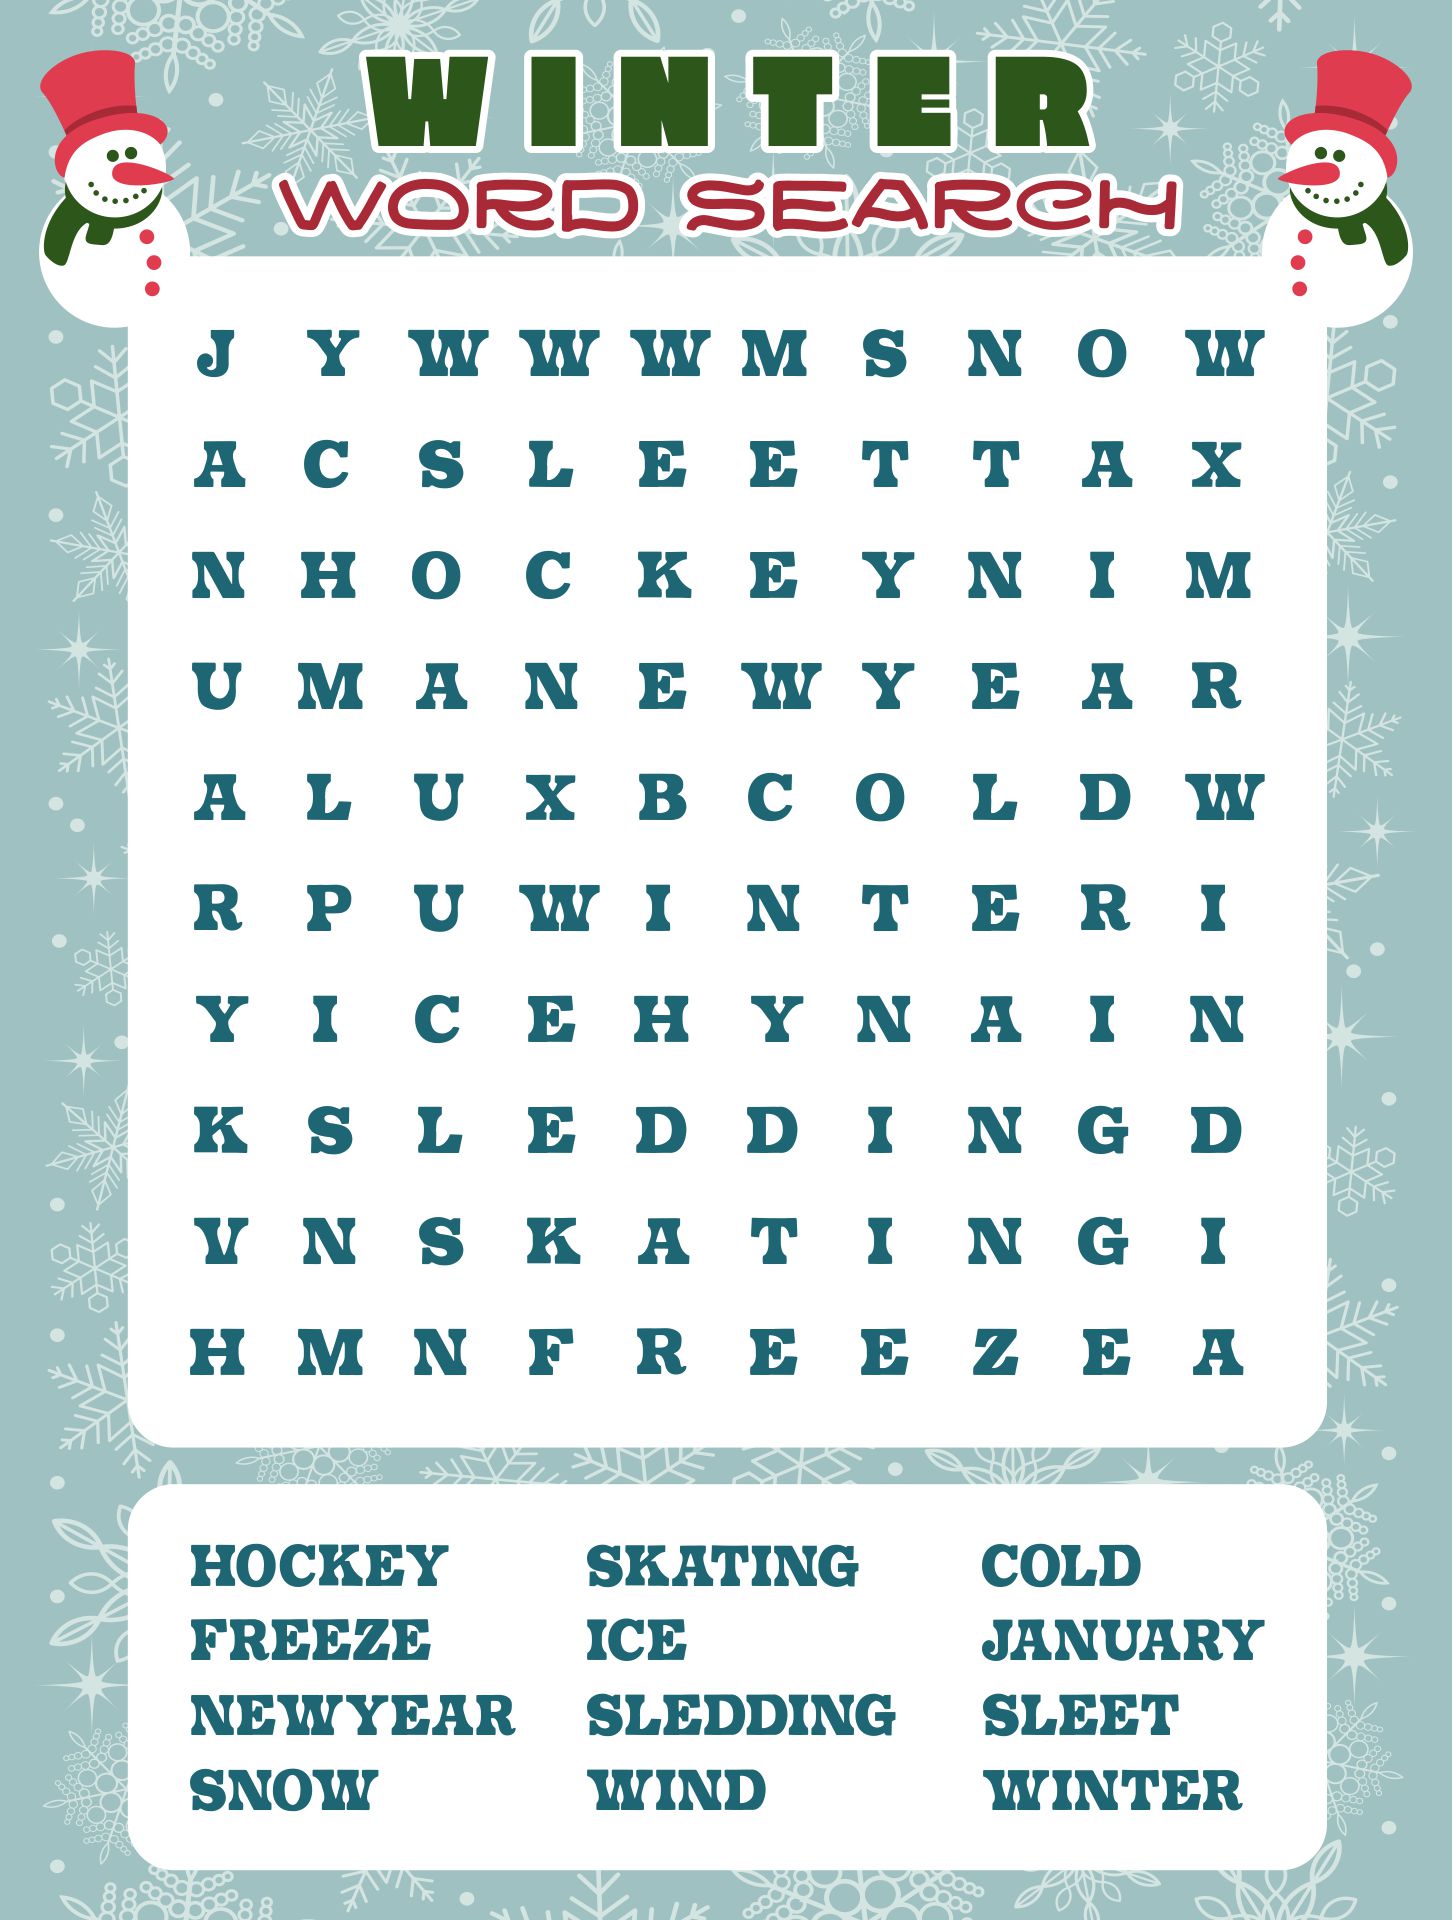 7-best-images-of-snow-day-word-search-free-printable-snow-word-search